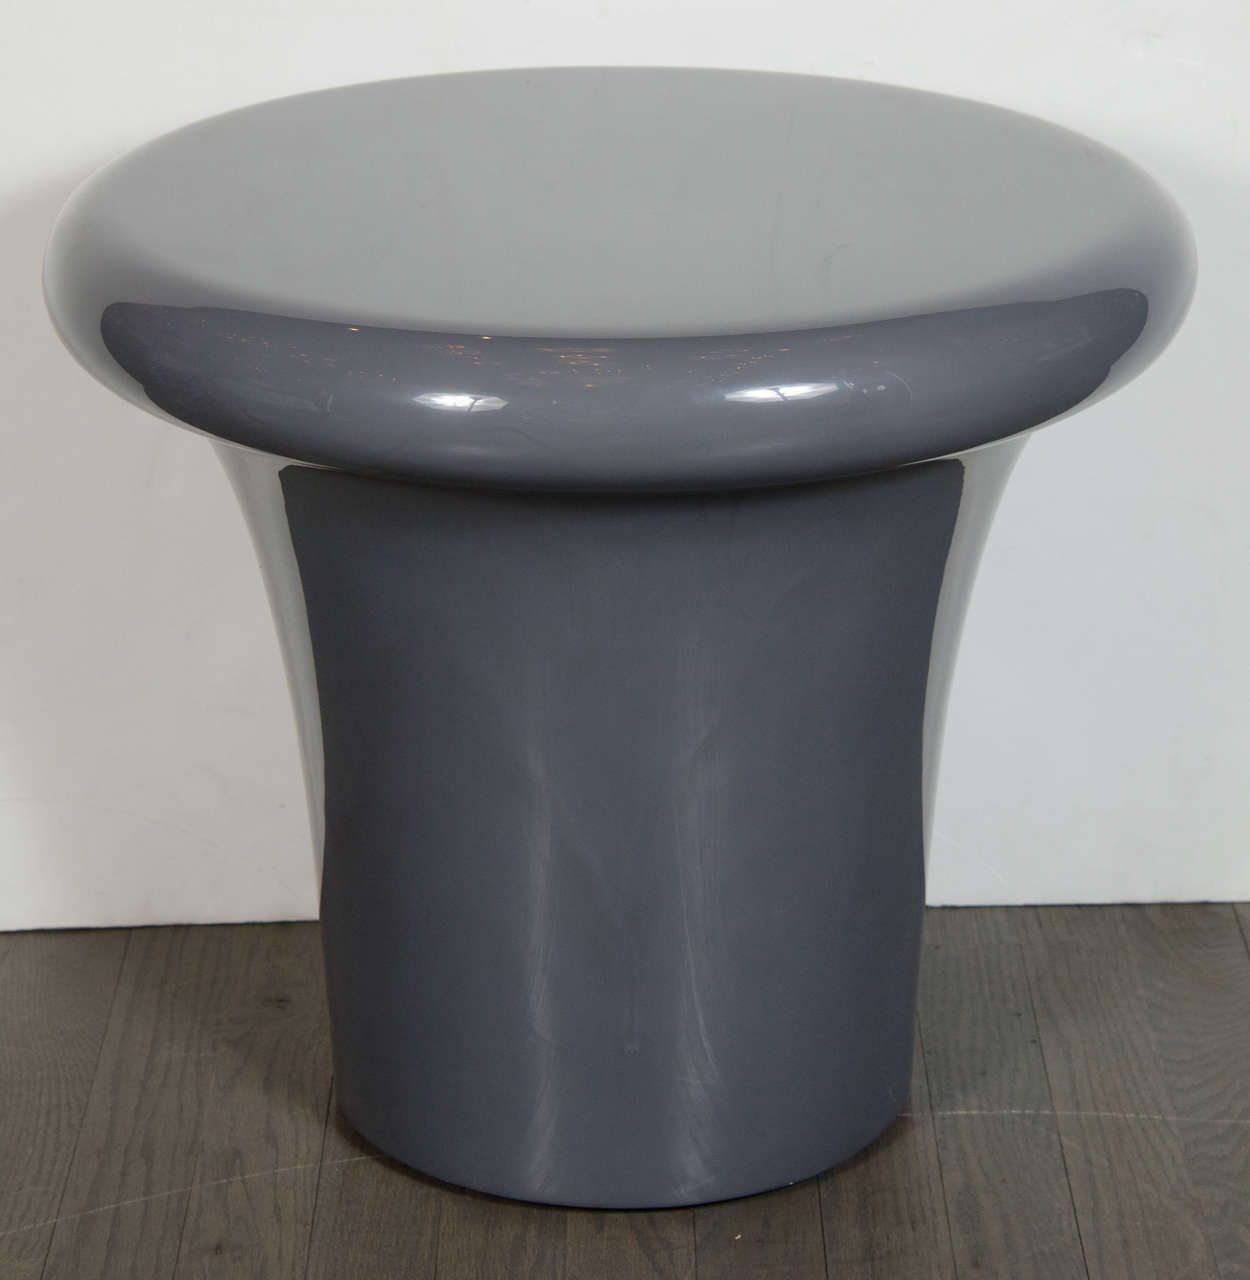 This Mid-Century side table features a subtly flared conical base opening into a round top with rounded edges and a dove gray lacquer finish. With its minimalistic organic form and radiant skein in a neutral hue, this piece illustrates furniture